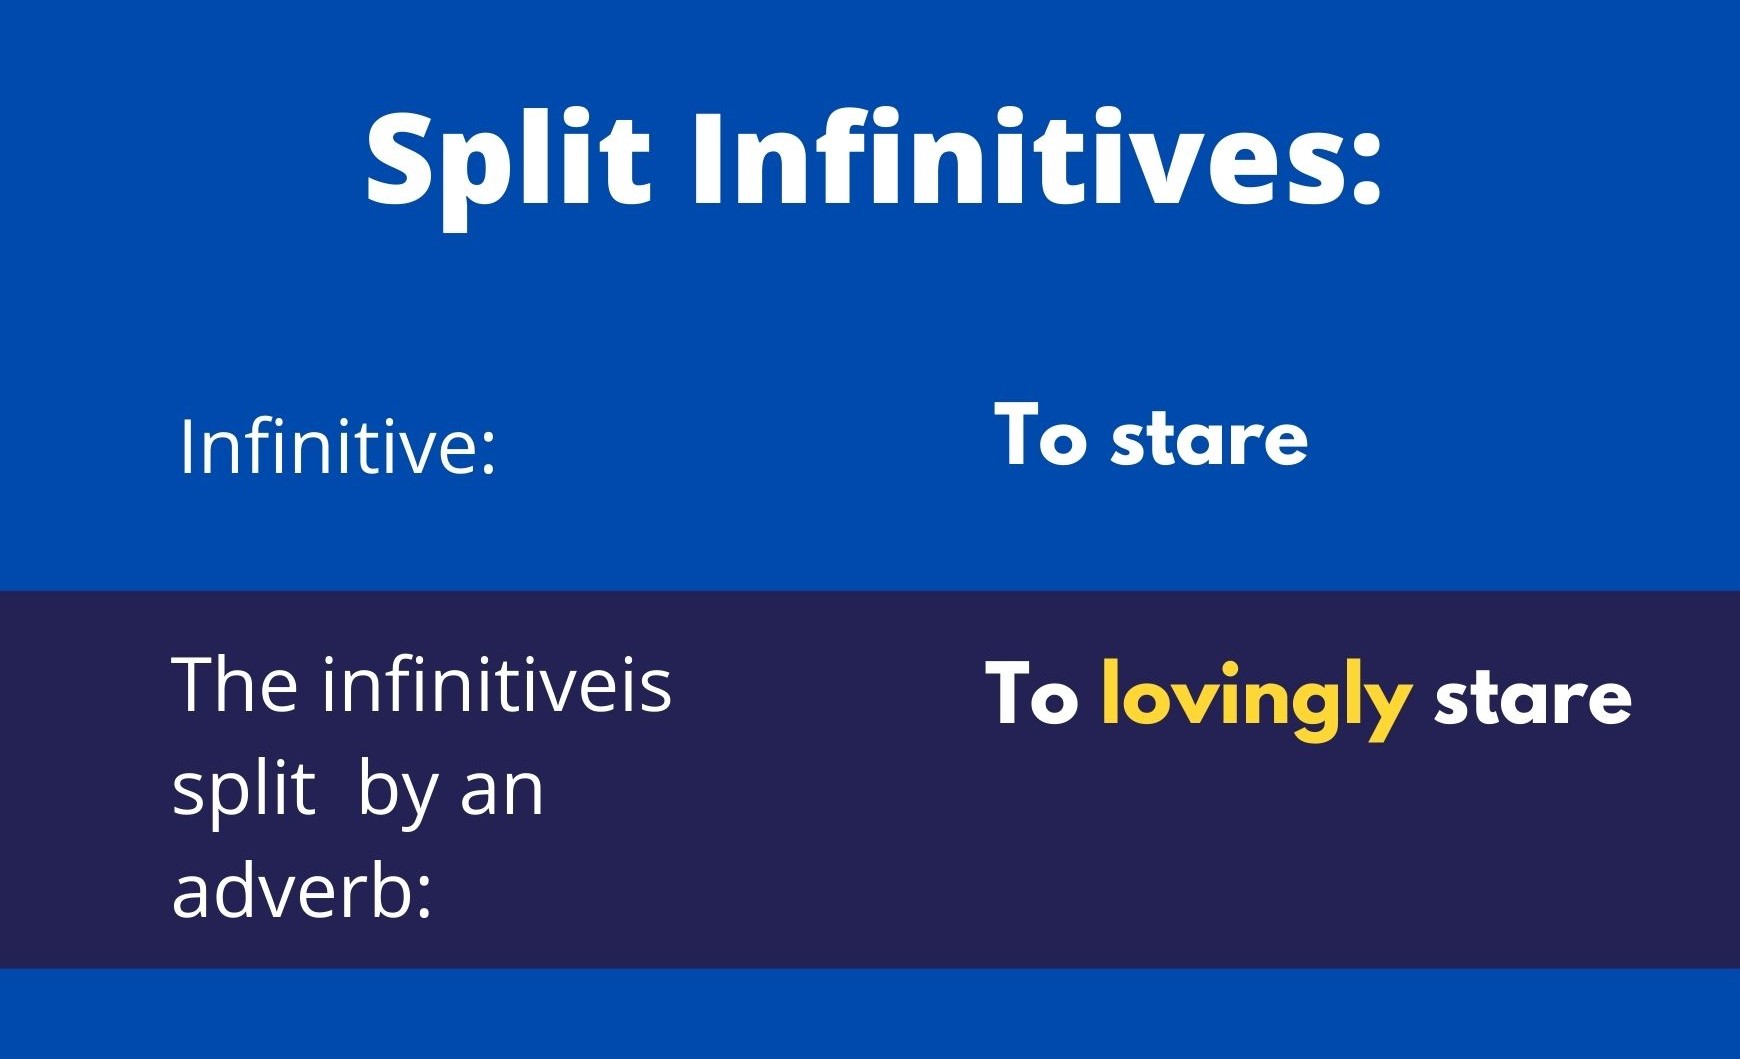 which sentence must be revised to eliminate a split infinitive